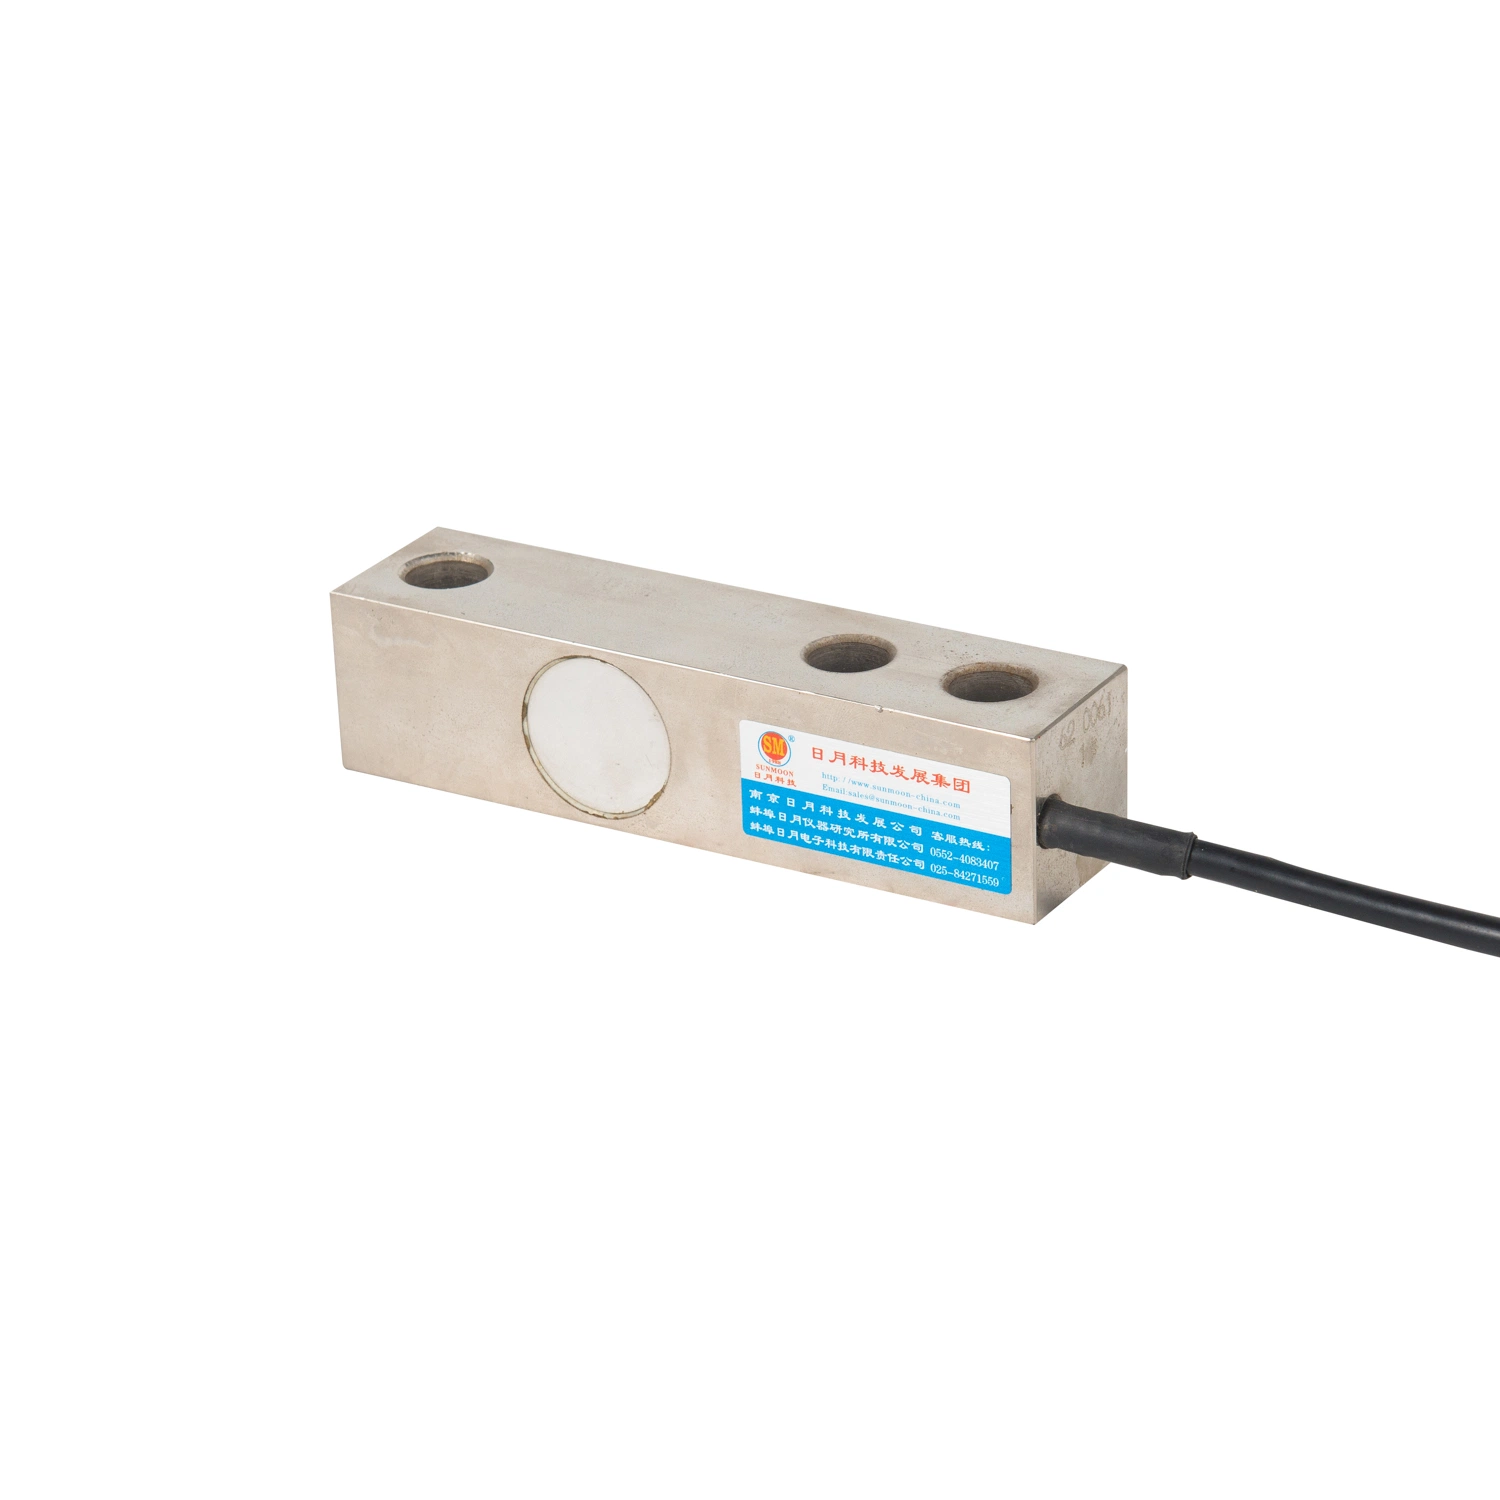 Manufacturhigh Precision Tension and Compression S Type Load Cell